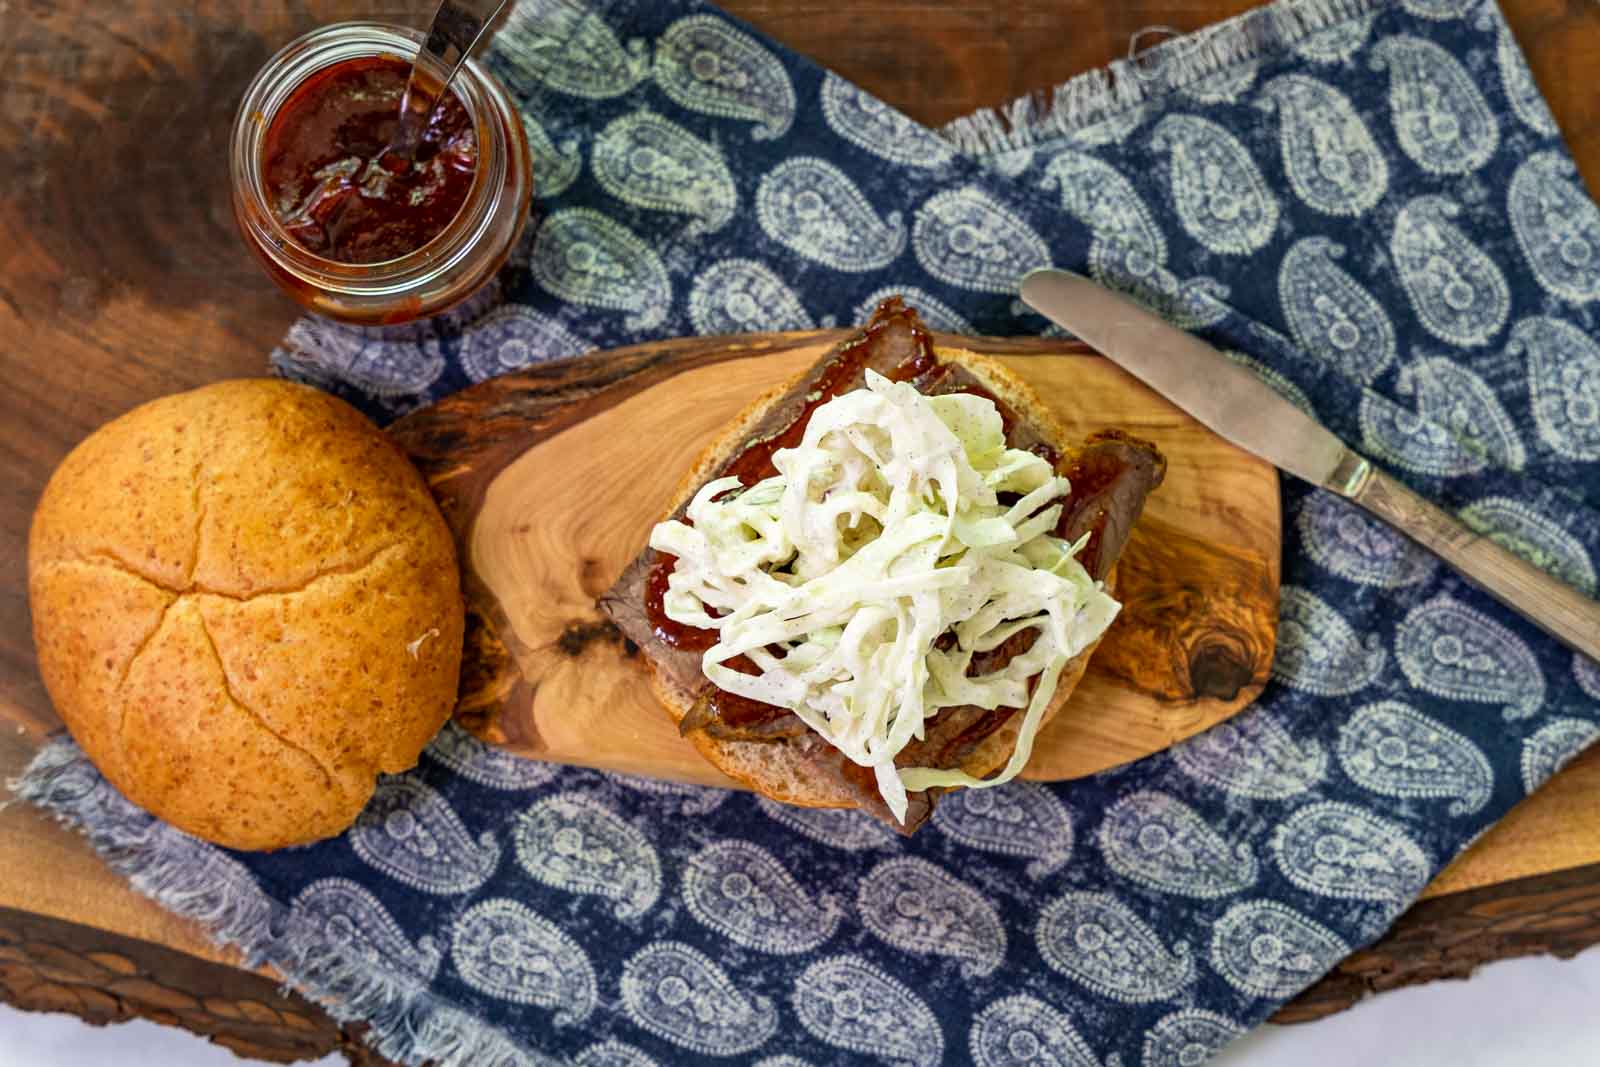 Top down view of a bun topped with brisket that's been slathered in bbq then topped with slaw.